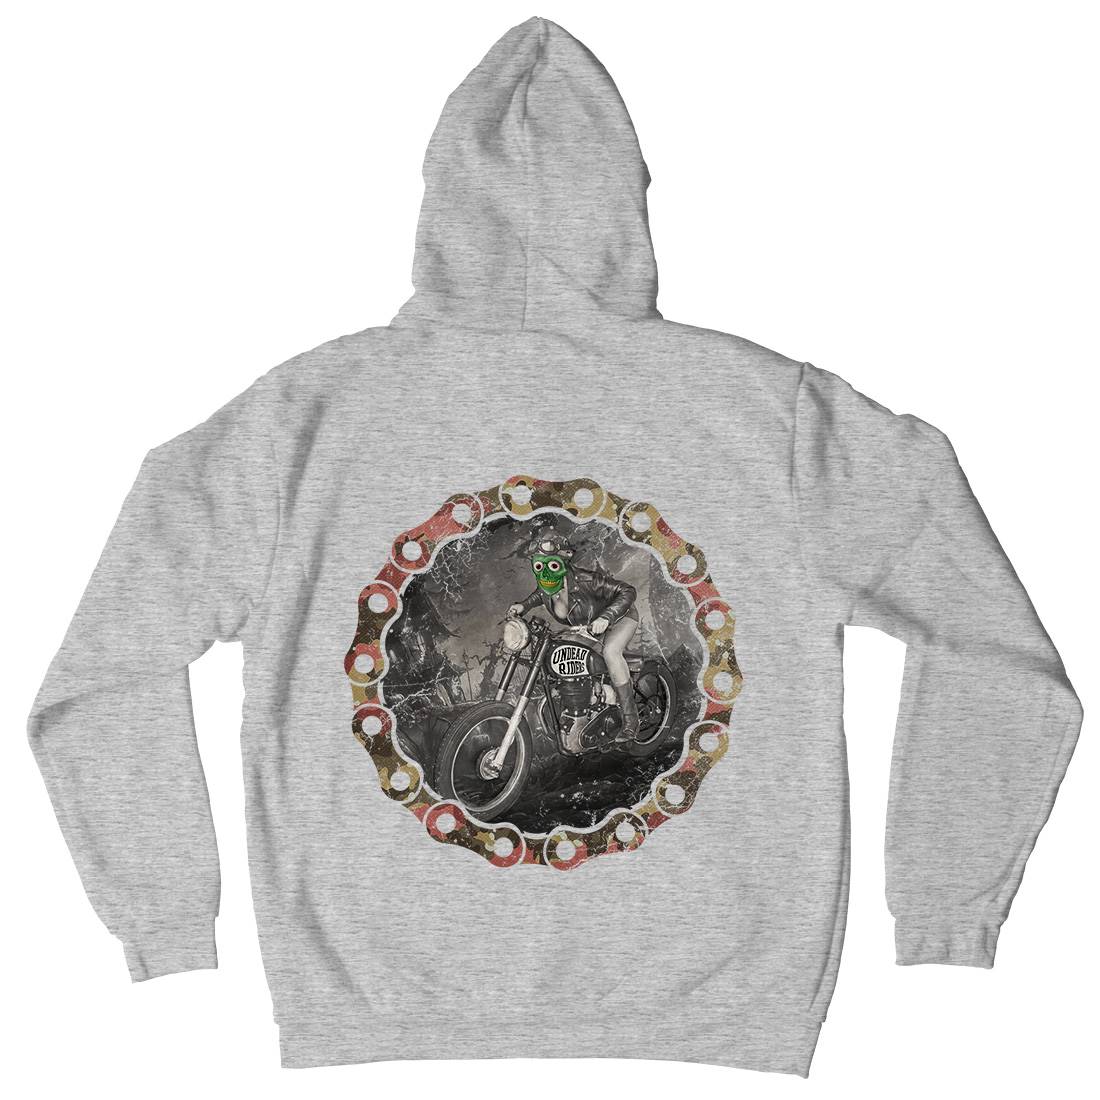 Undead Riders Mens Hoodie With Pocket Motorcycles A937